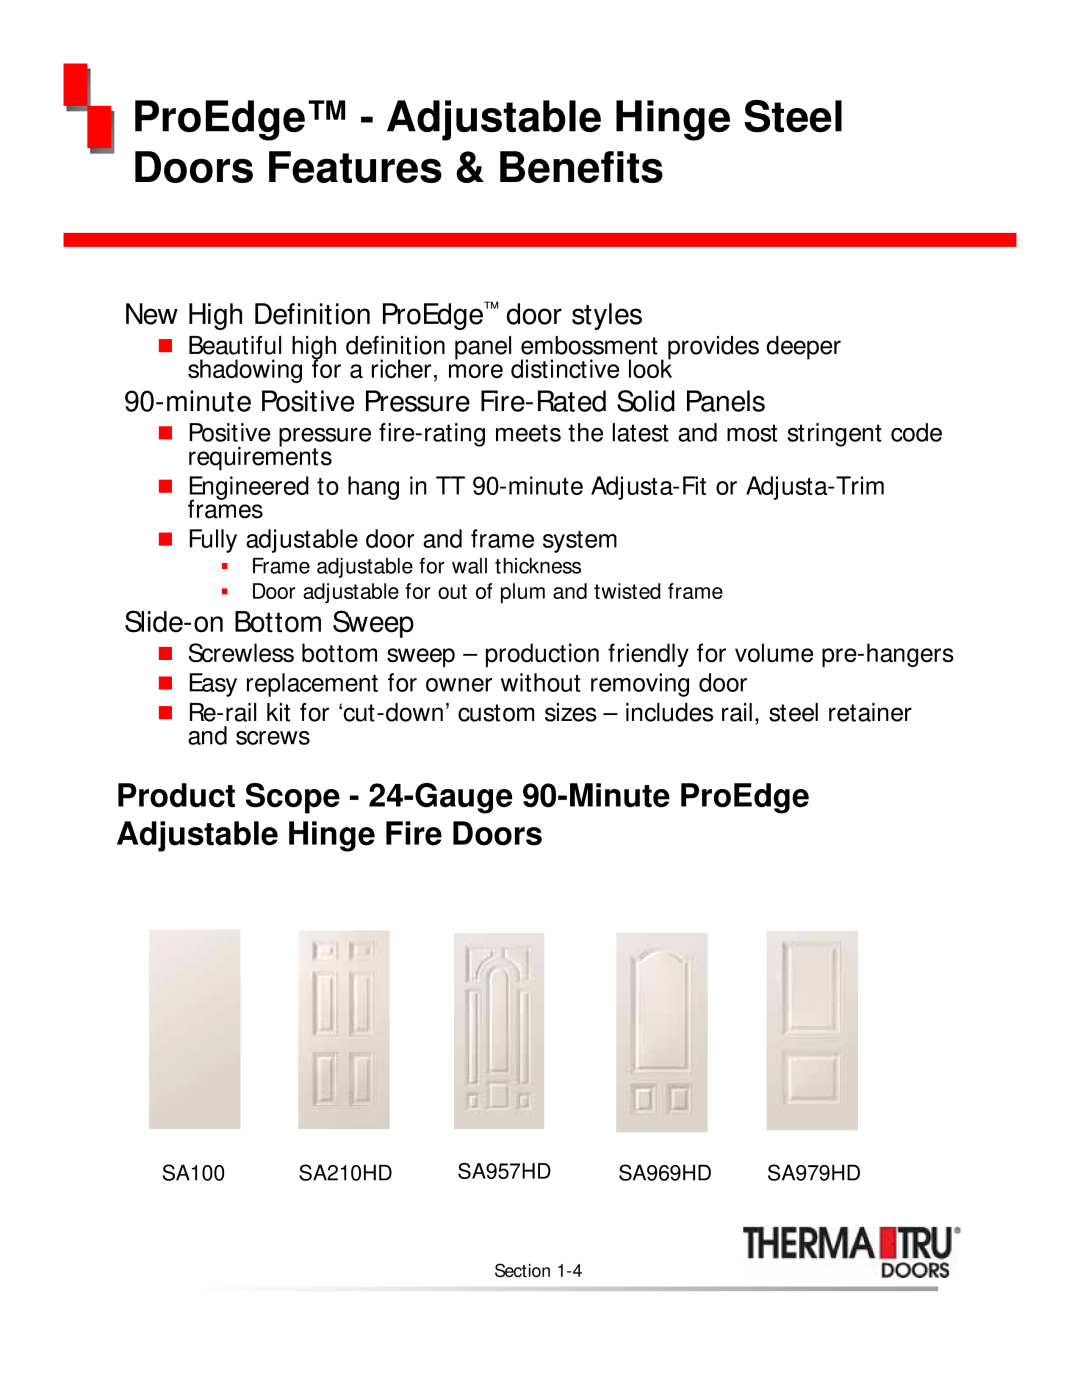 Therma-Tru none manual New High Definition ProEdge door styles, minutePositive Pressure Fire-RatedSolid Panels 